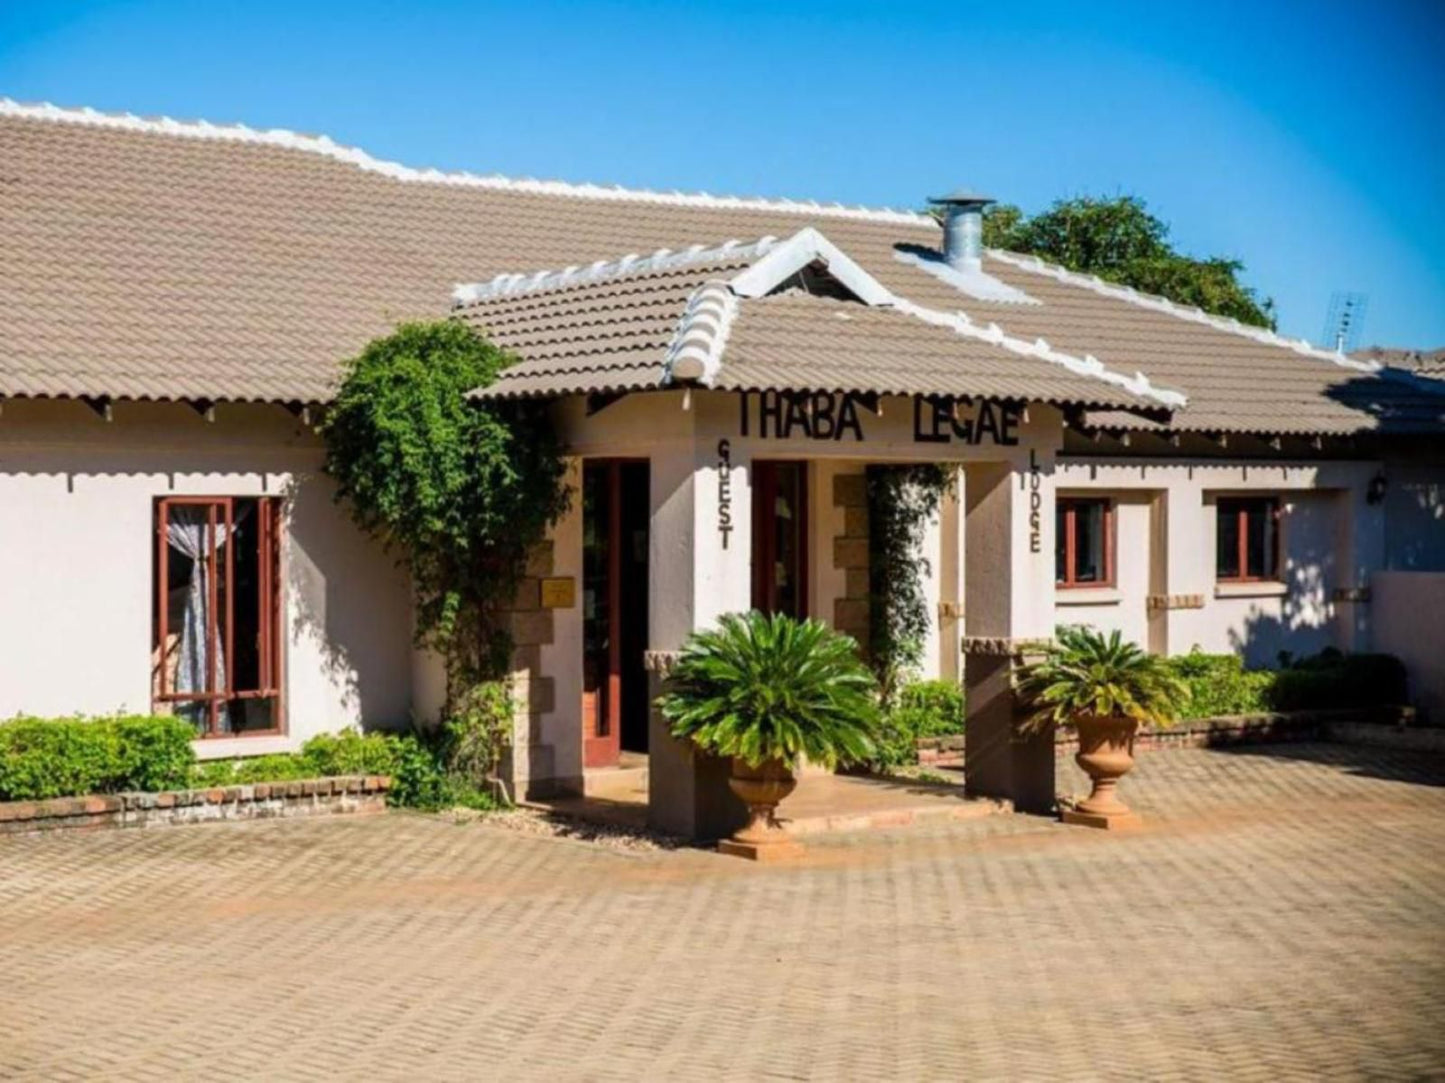 Thaba Legae Guest Lodge Rustenburg North West Province South Africa Complementary Colors, House, Building, Architecture